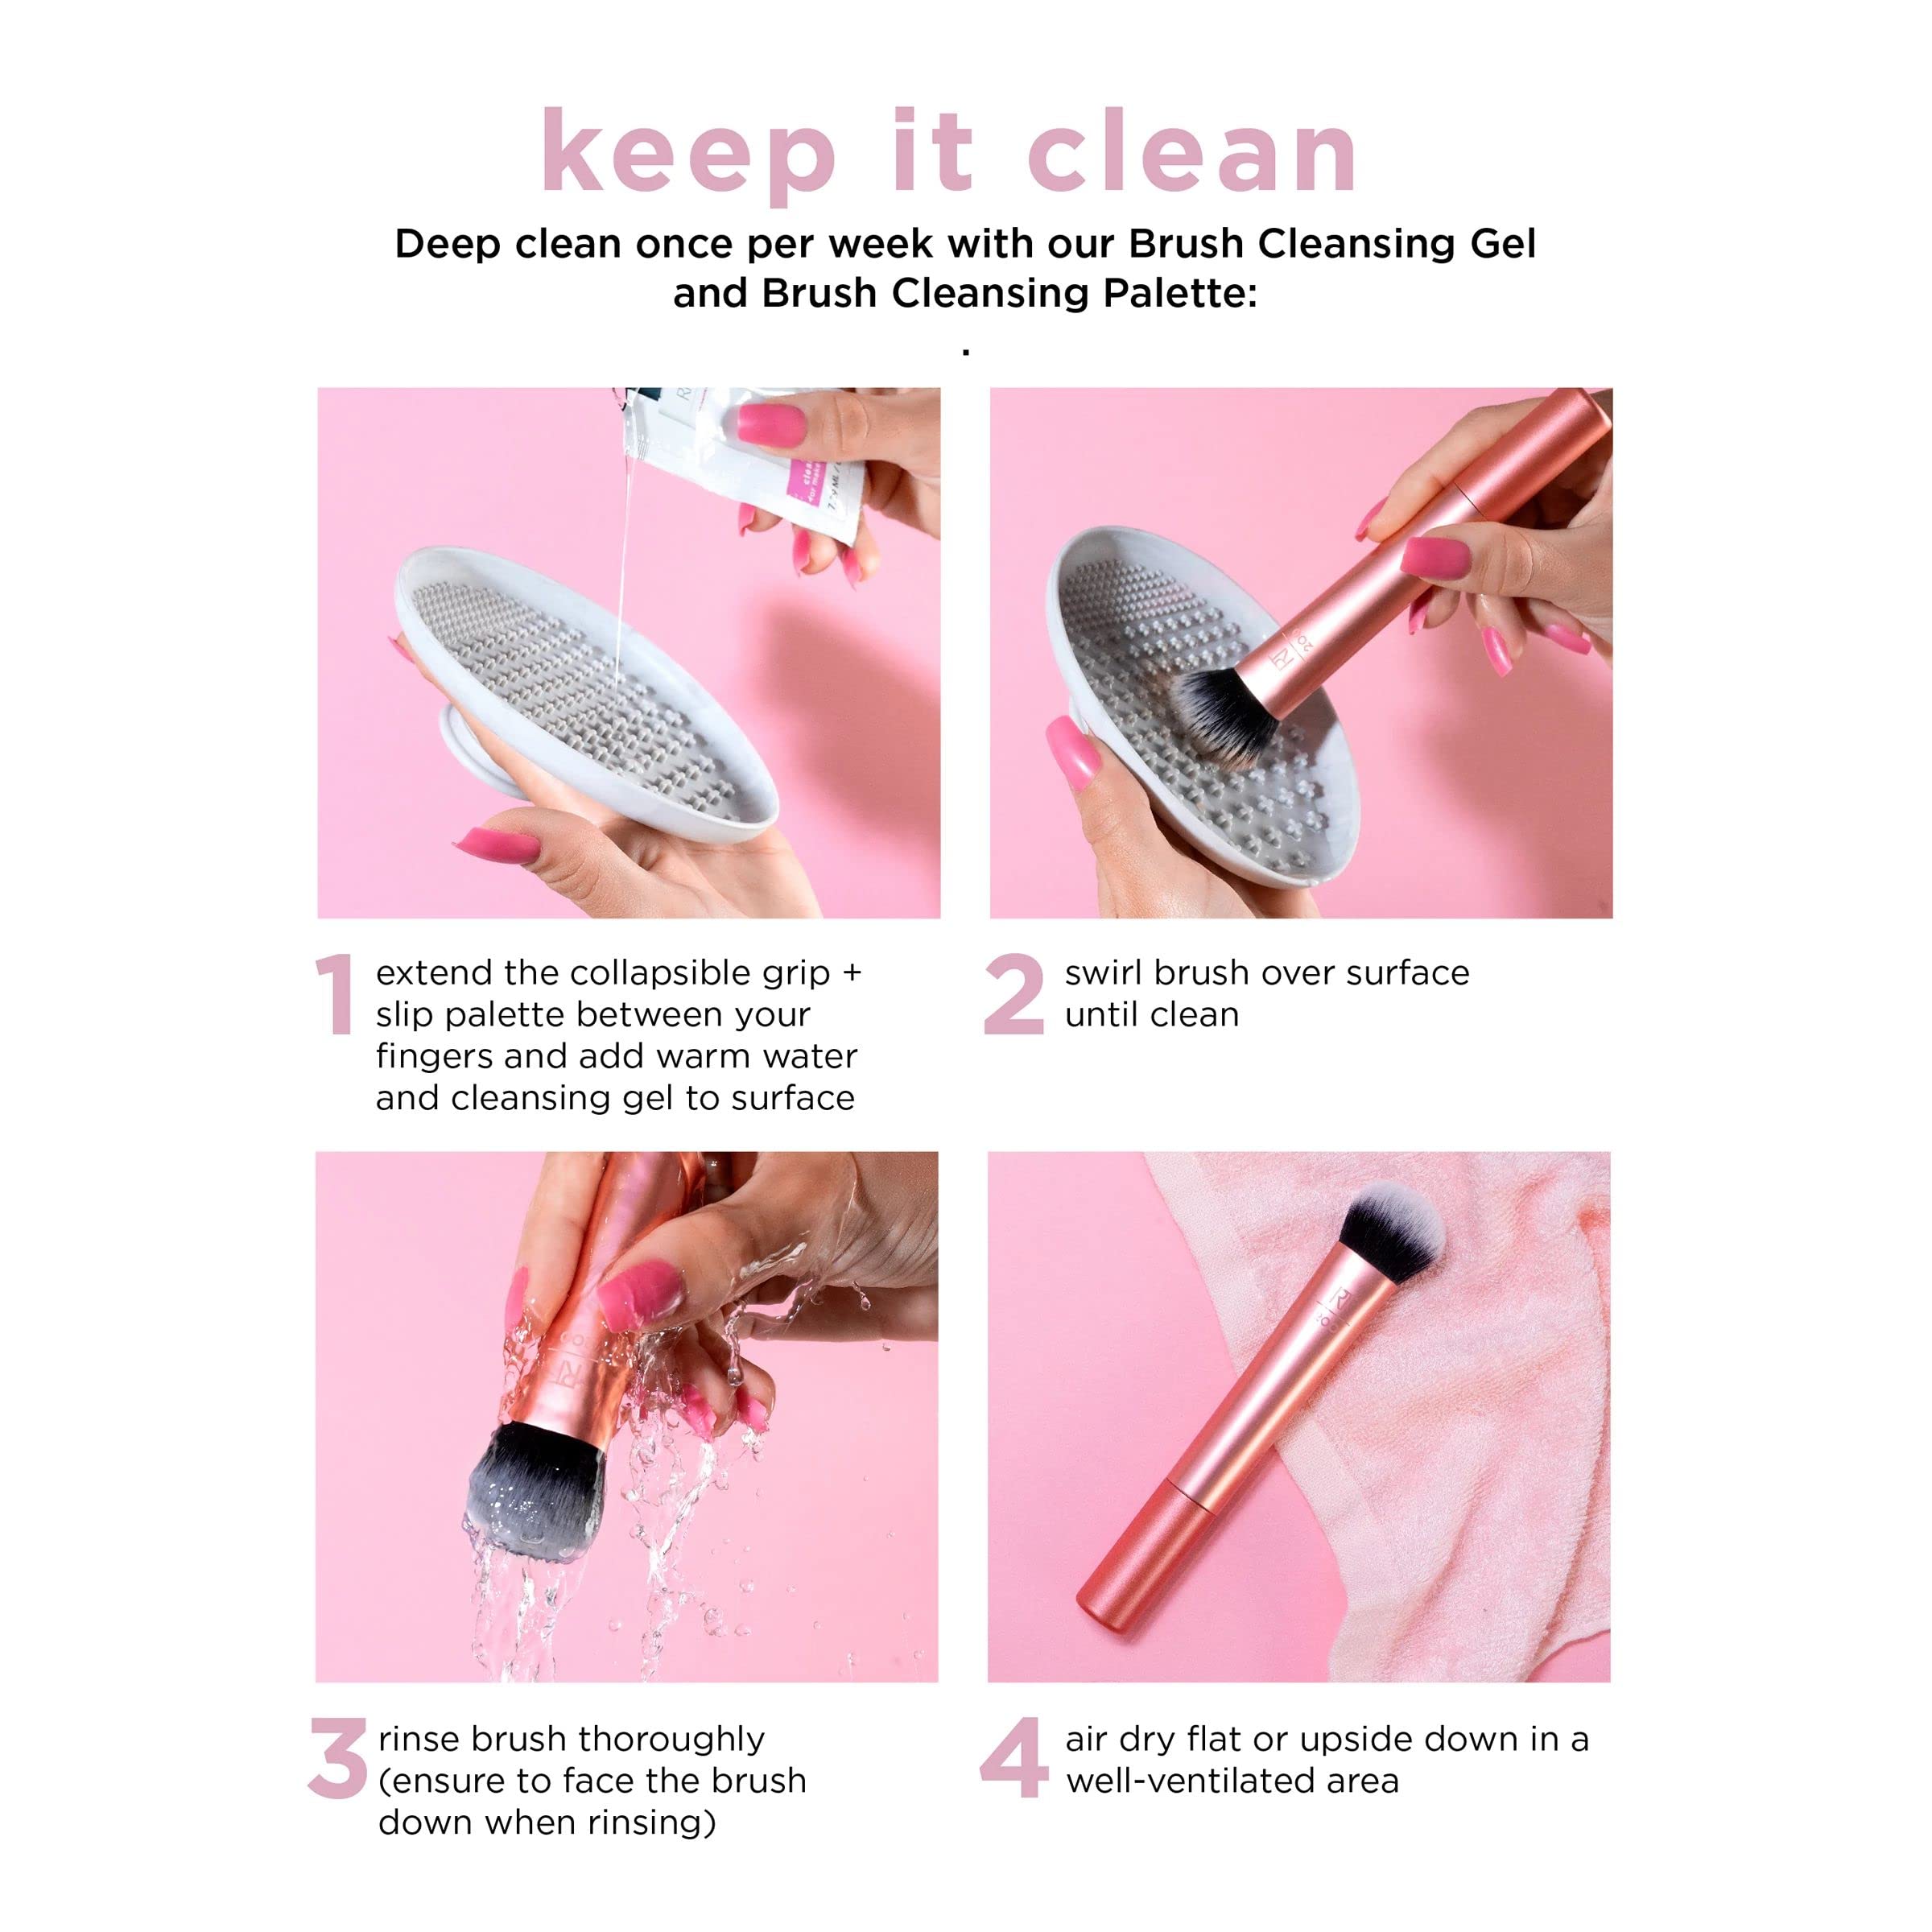 Real Techniques Expert Face Makeup Brush, For Liquid & Cream Foundation & Other Makeup Products, Buildable Coverage for Base Makeup, Dense, Synthetic Bristles, Vegan & Cruelty-Free, 1 Count